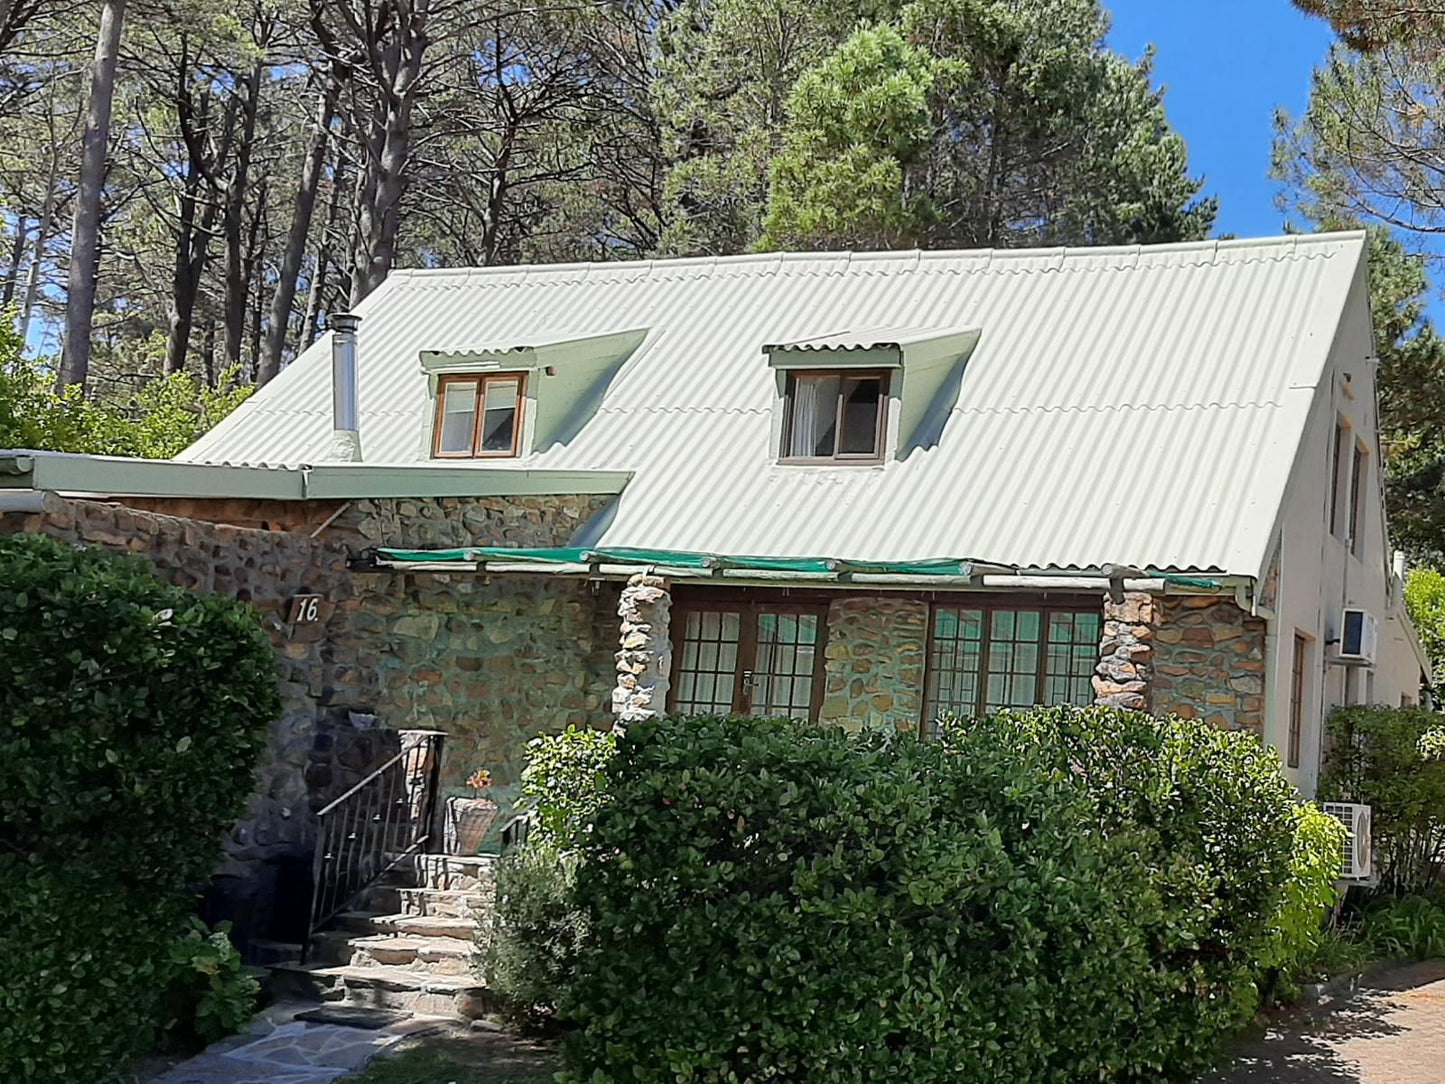 Houtkapperspoort Mountain Cottages Constantia Cape Town Western Cape South Africa Cabin, Building, Architecture, House